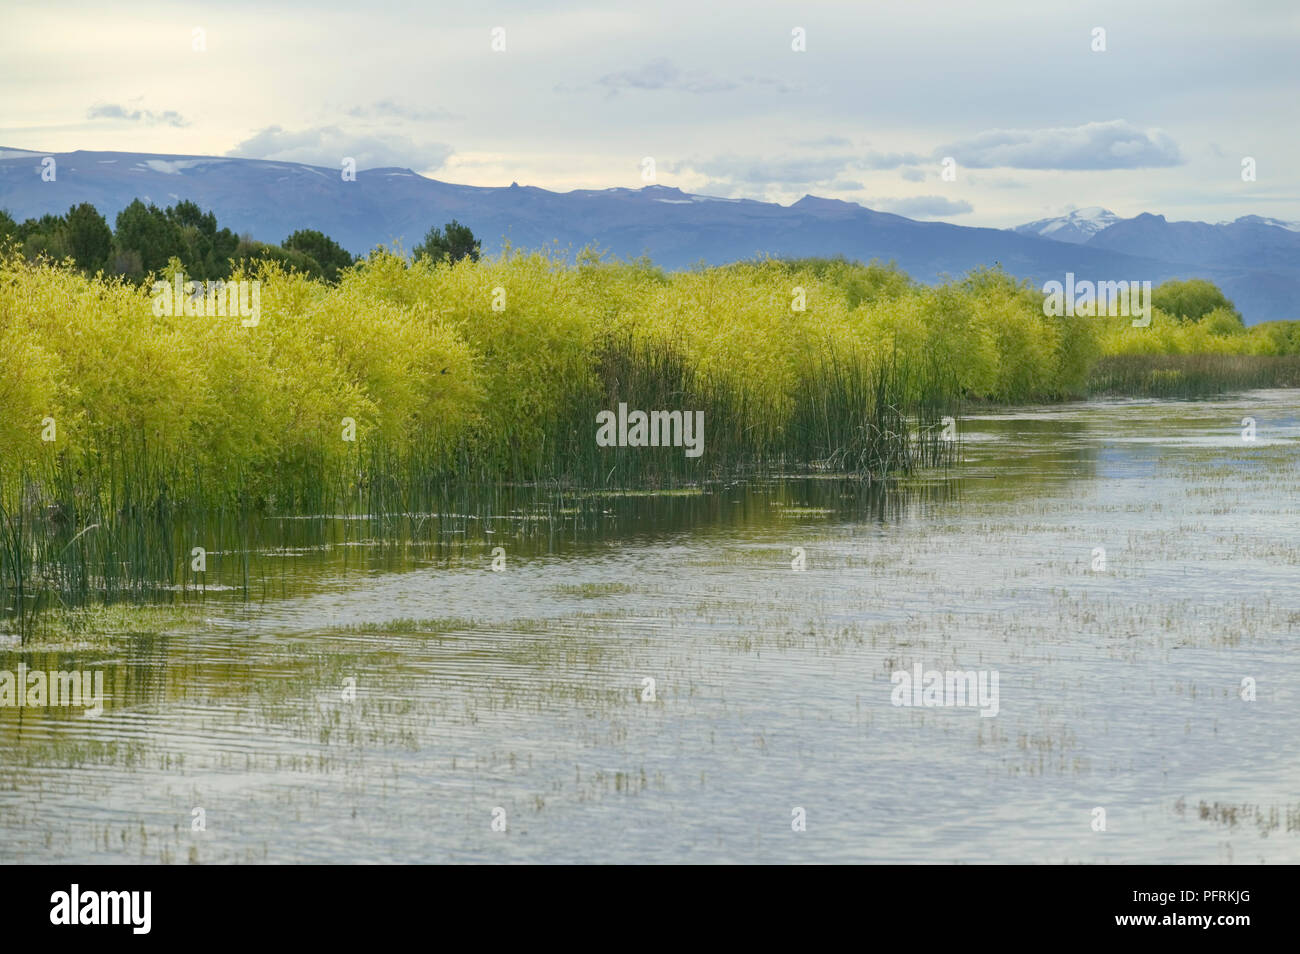 Argentina, Patagonia, Los Antiguos, marshes along the shore of Lago Buenos Aires Stock Photo